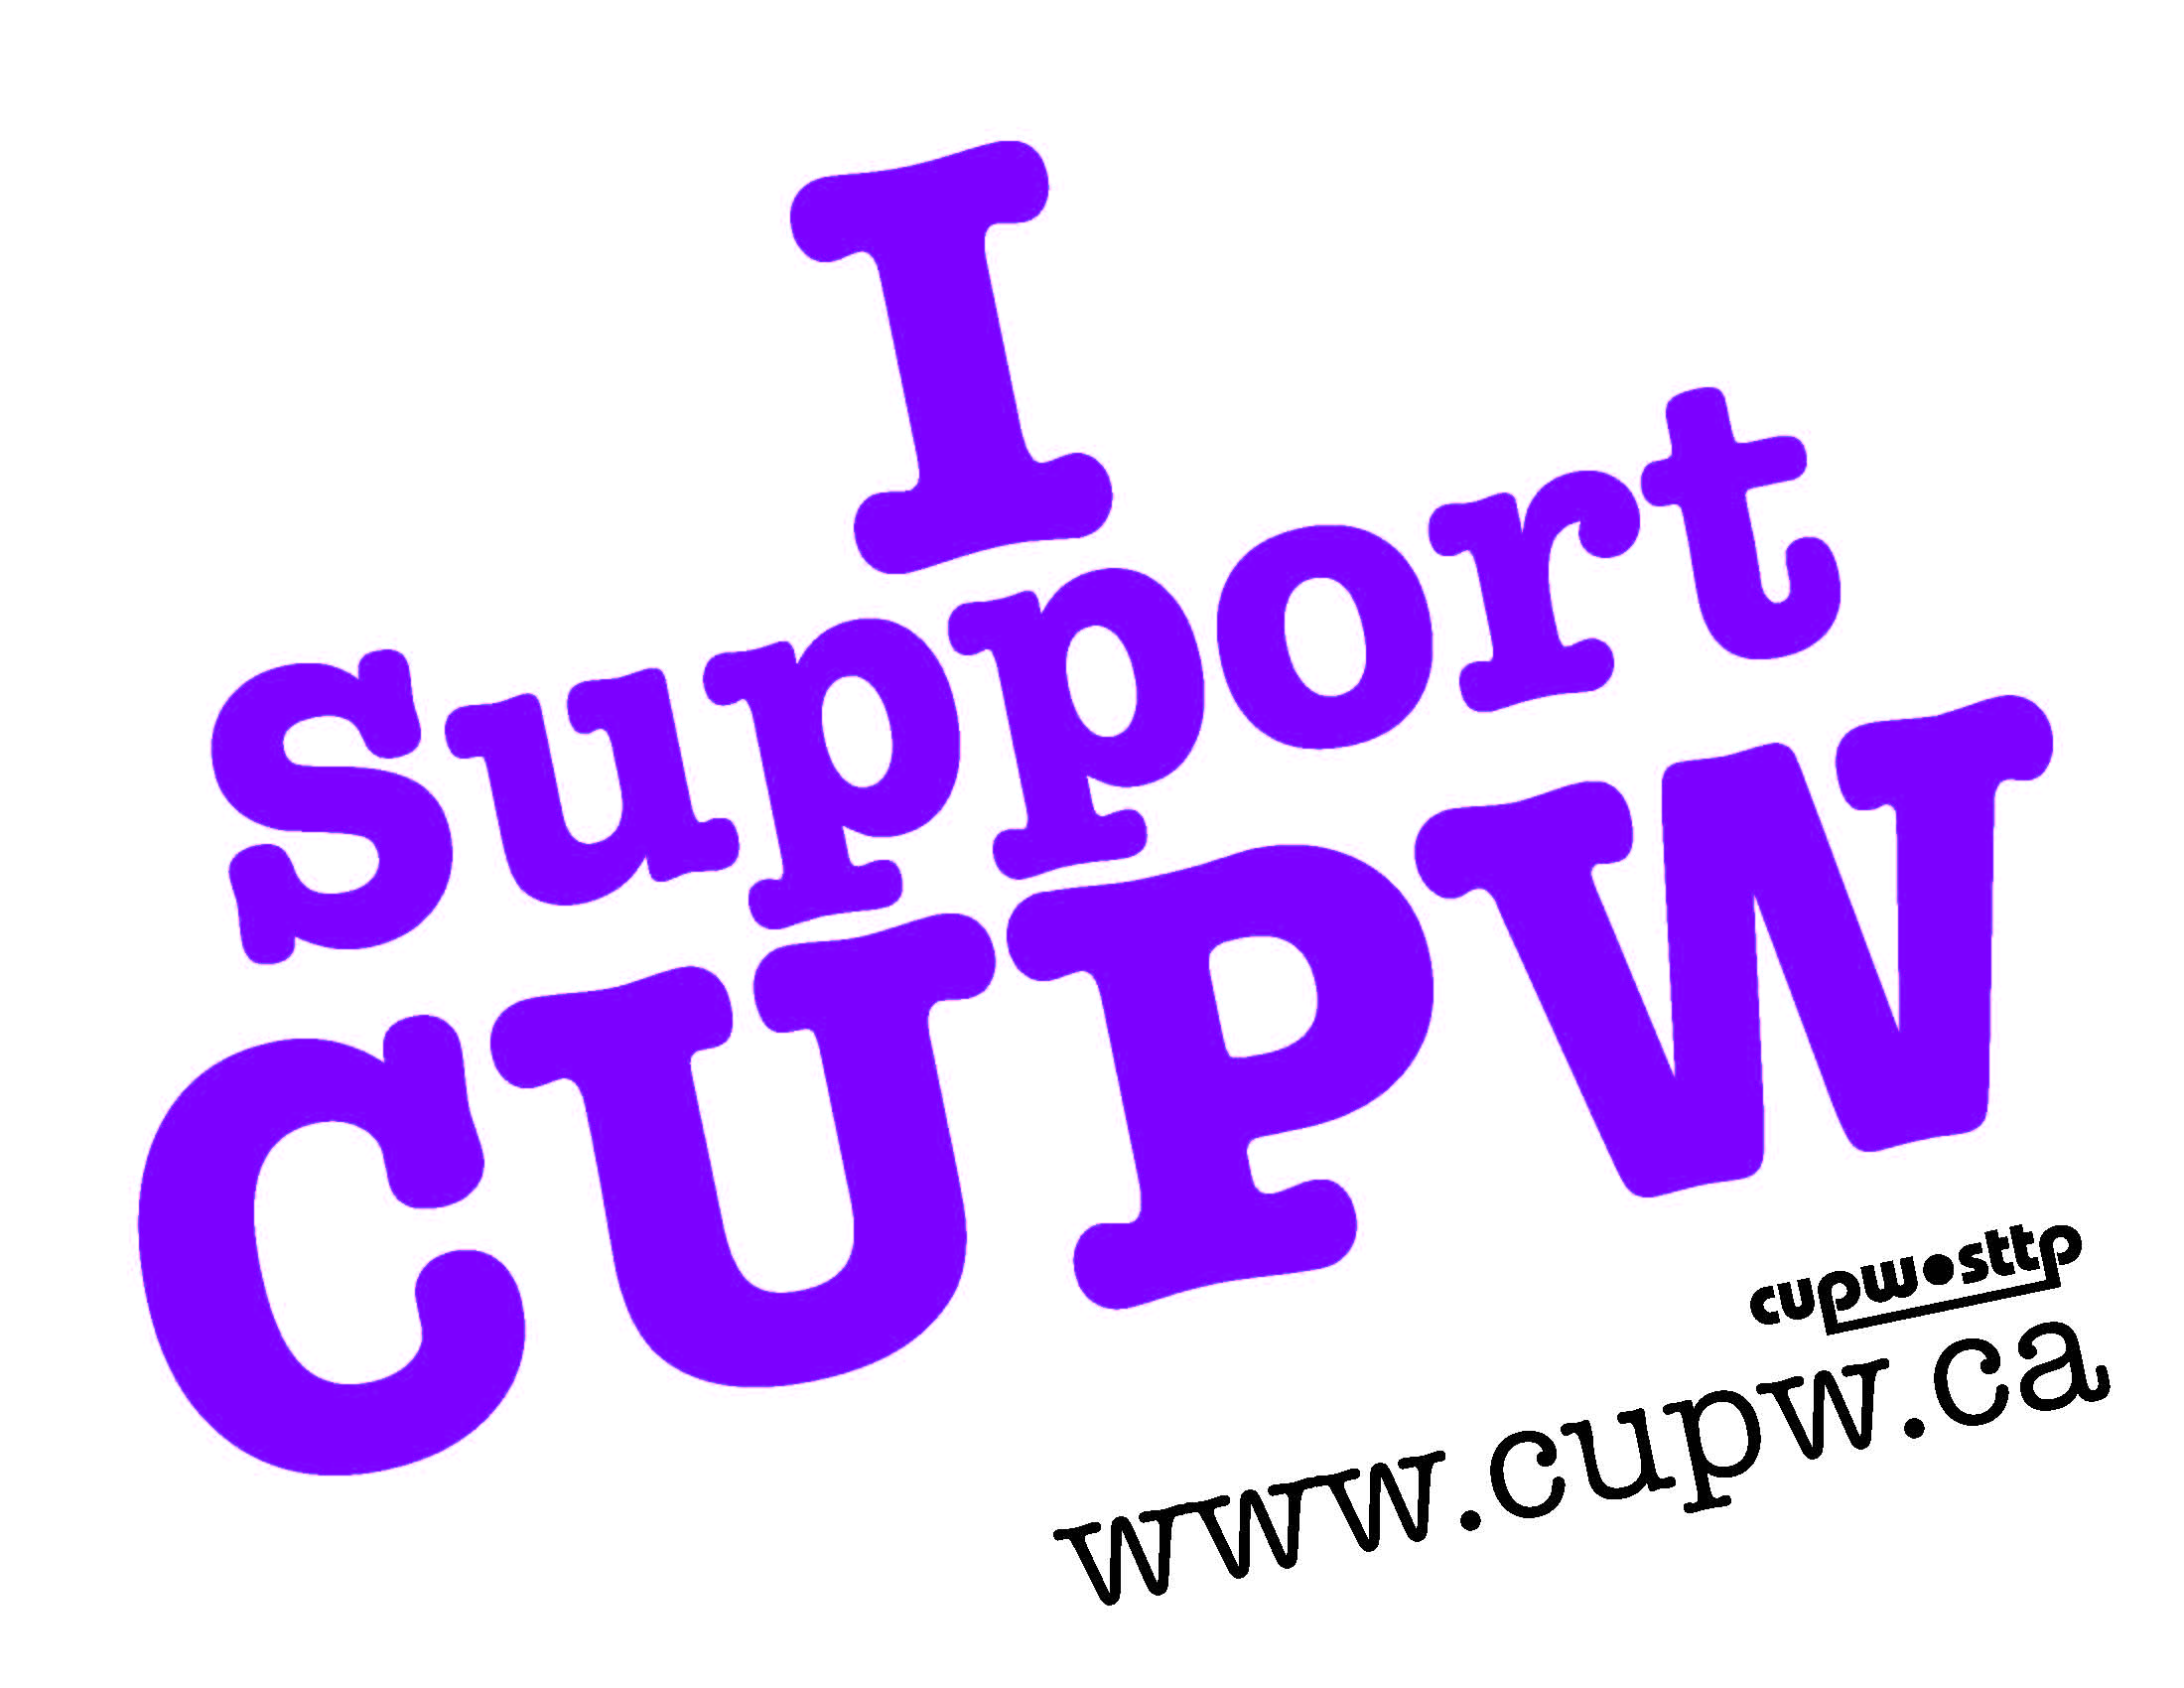 Graphical text saying "I Support CUPW", "cupwesttp", and "www.cupw.ca".